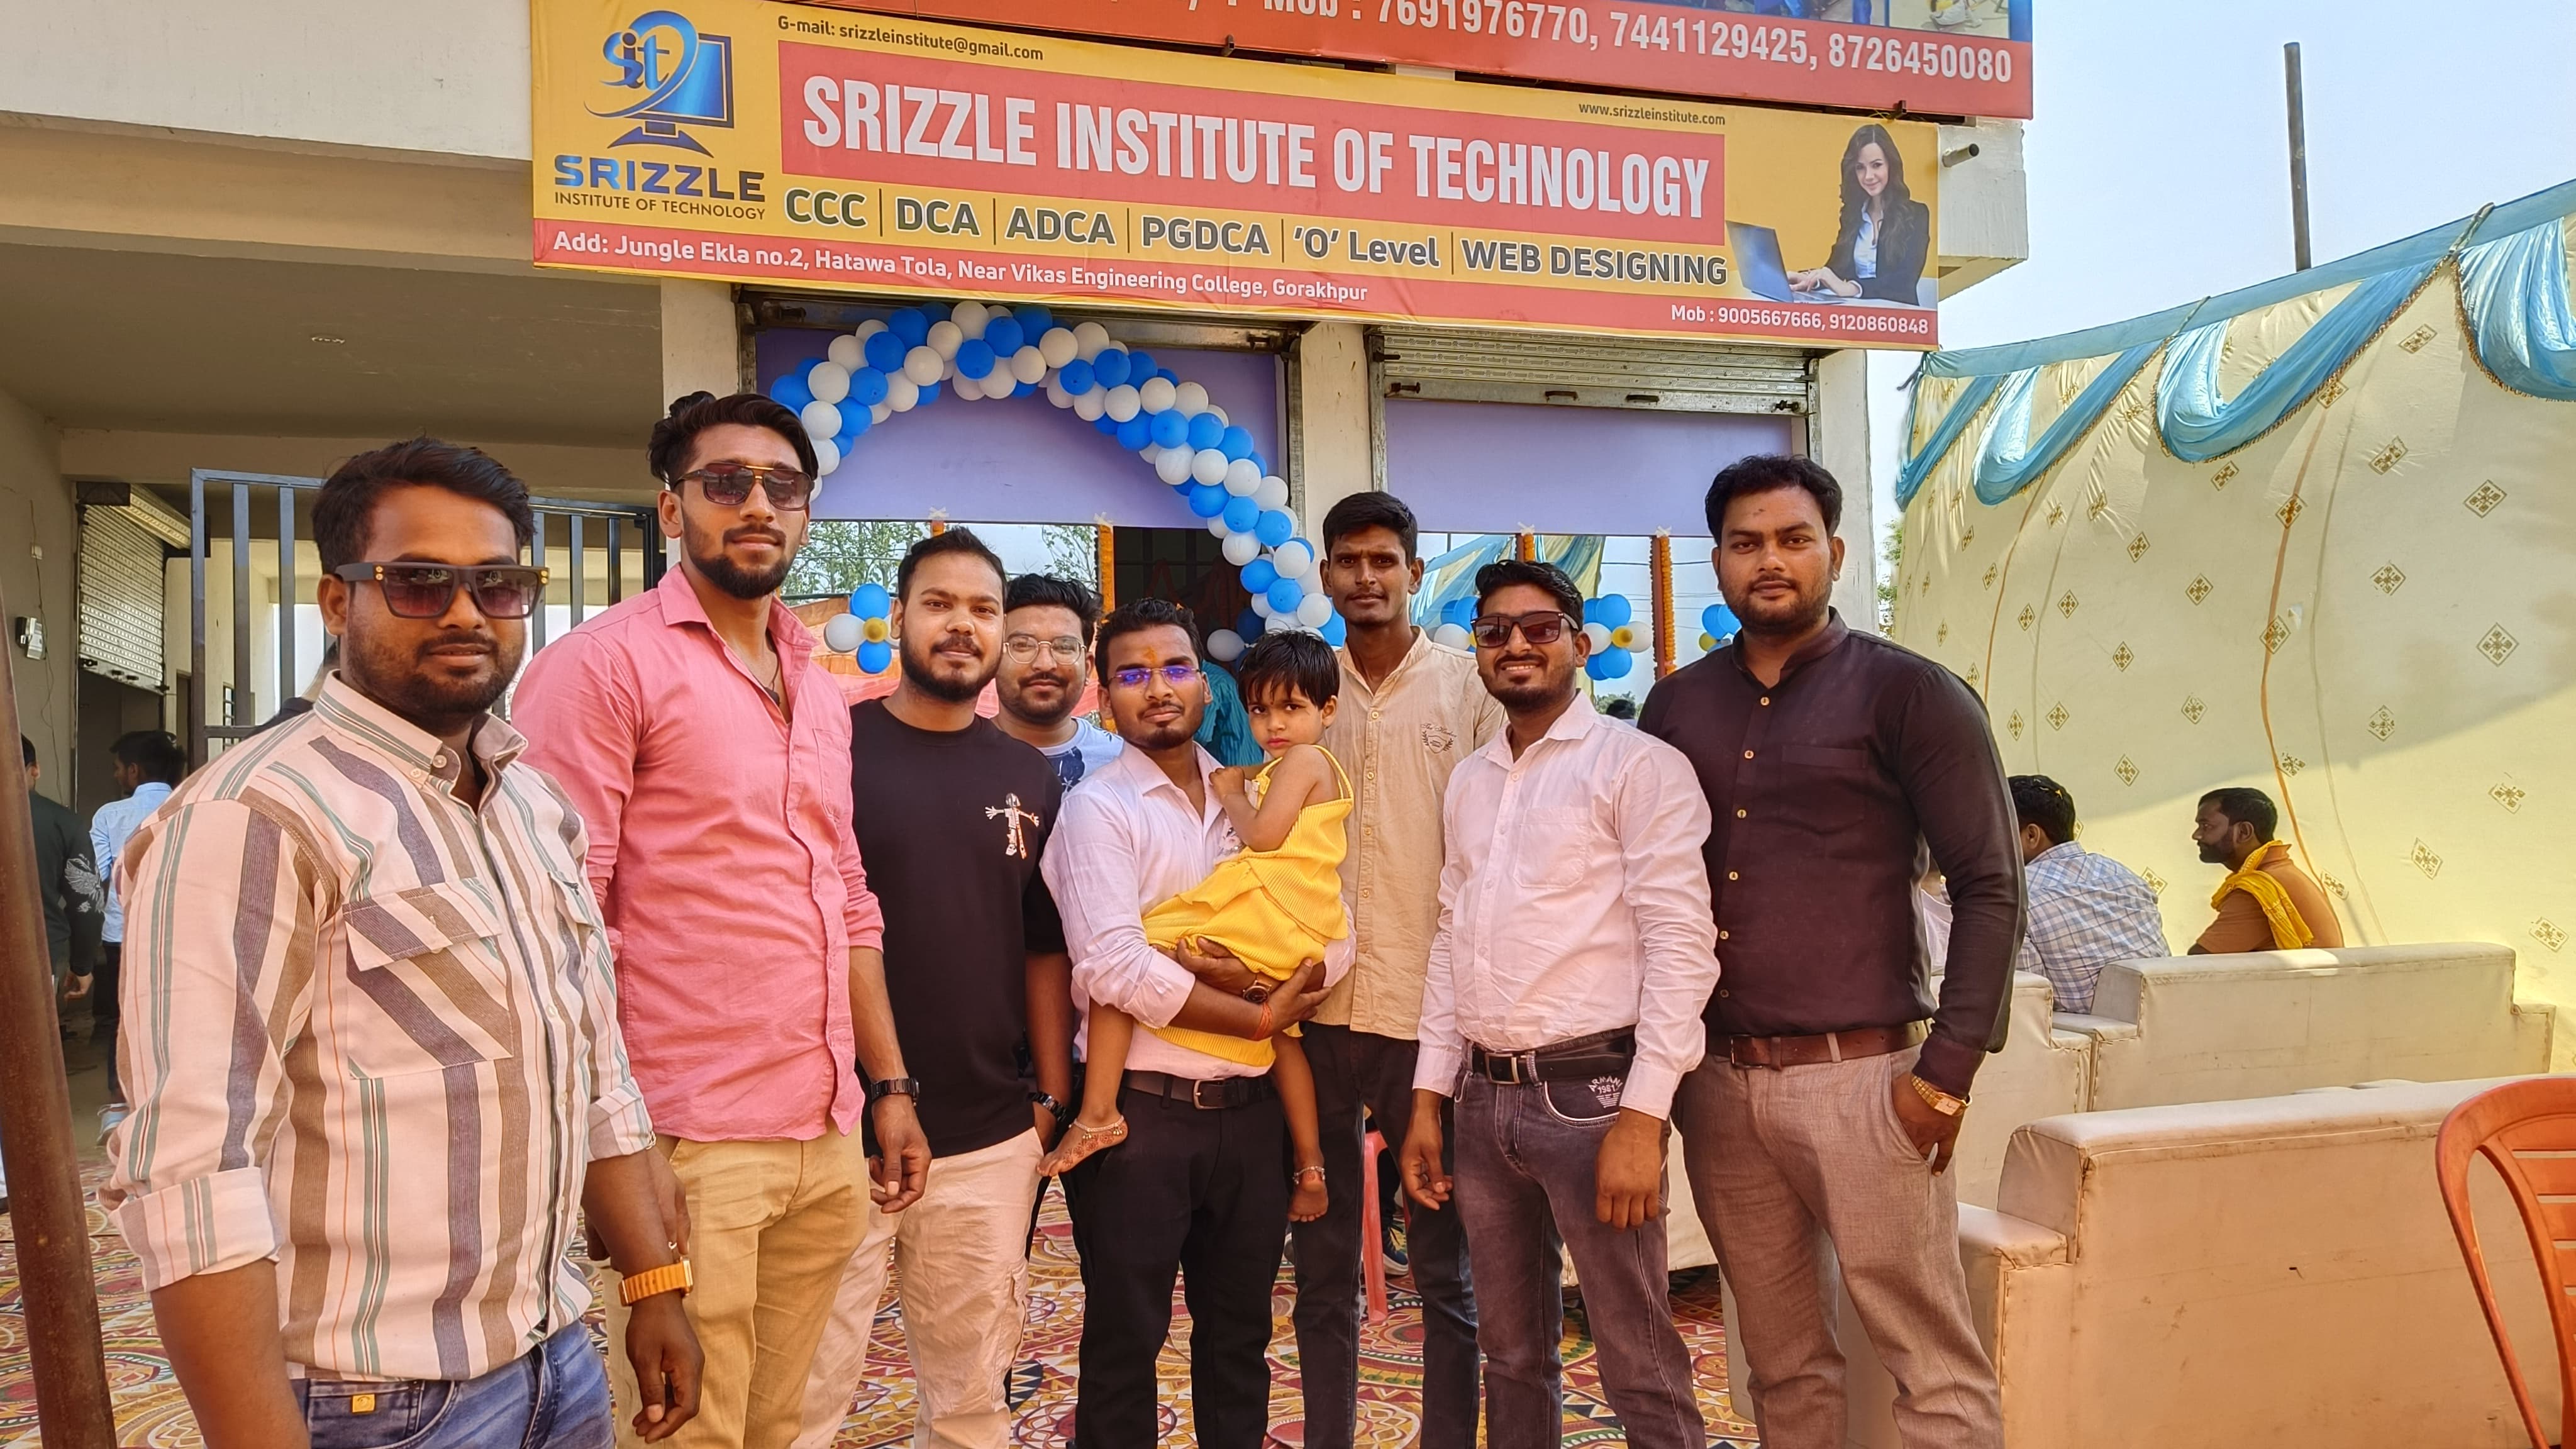 SRIZZLE INSTITUTE OF TECHNOLOGY